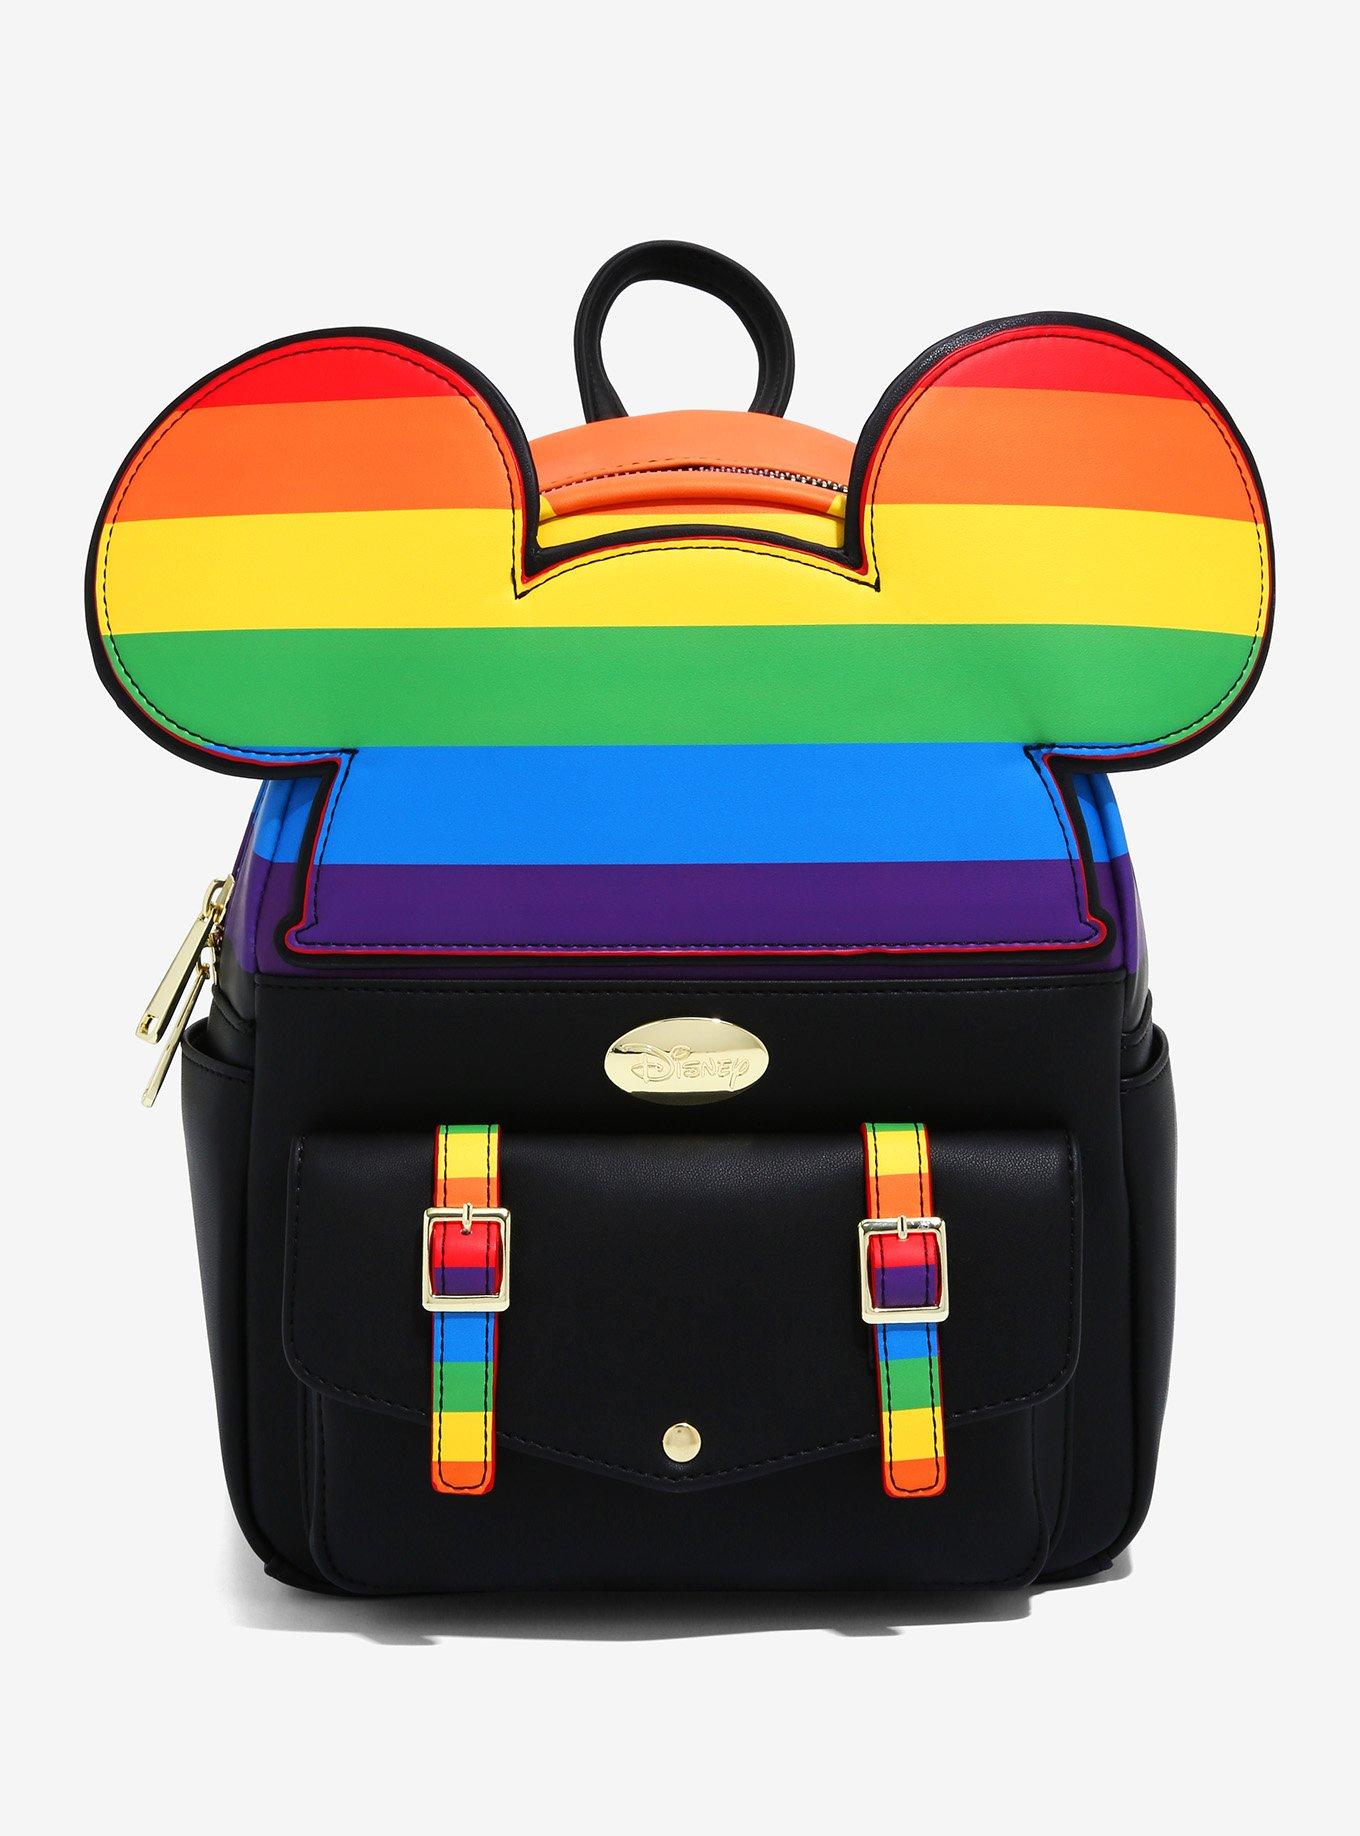 Loungefly Mickey Mouse Pride Backpack, Rainbow Flag Bag, Pride Bags for Lgbt Pride Month, Rainbow Striped Gifts & Accessories